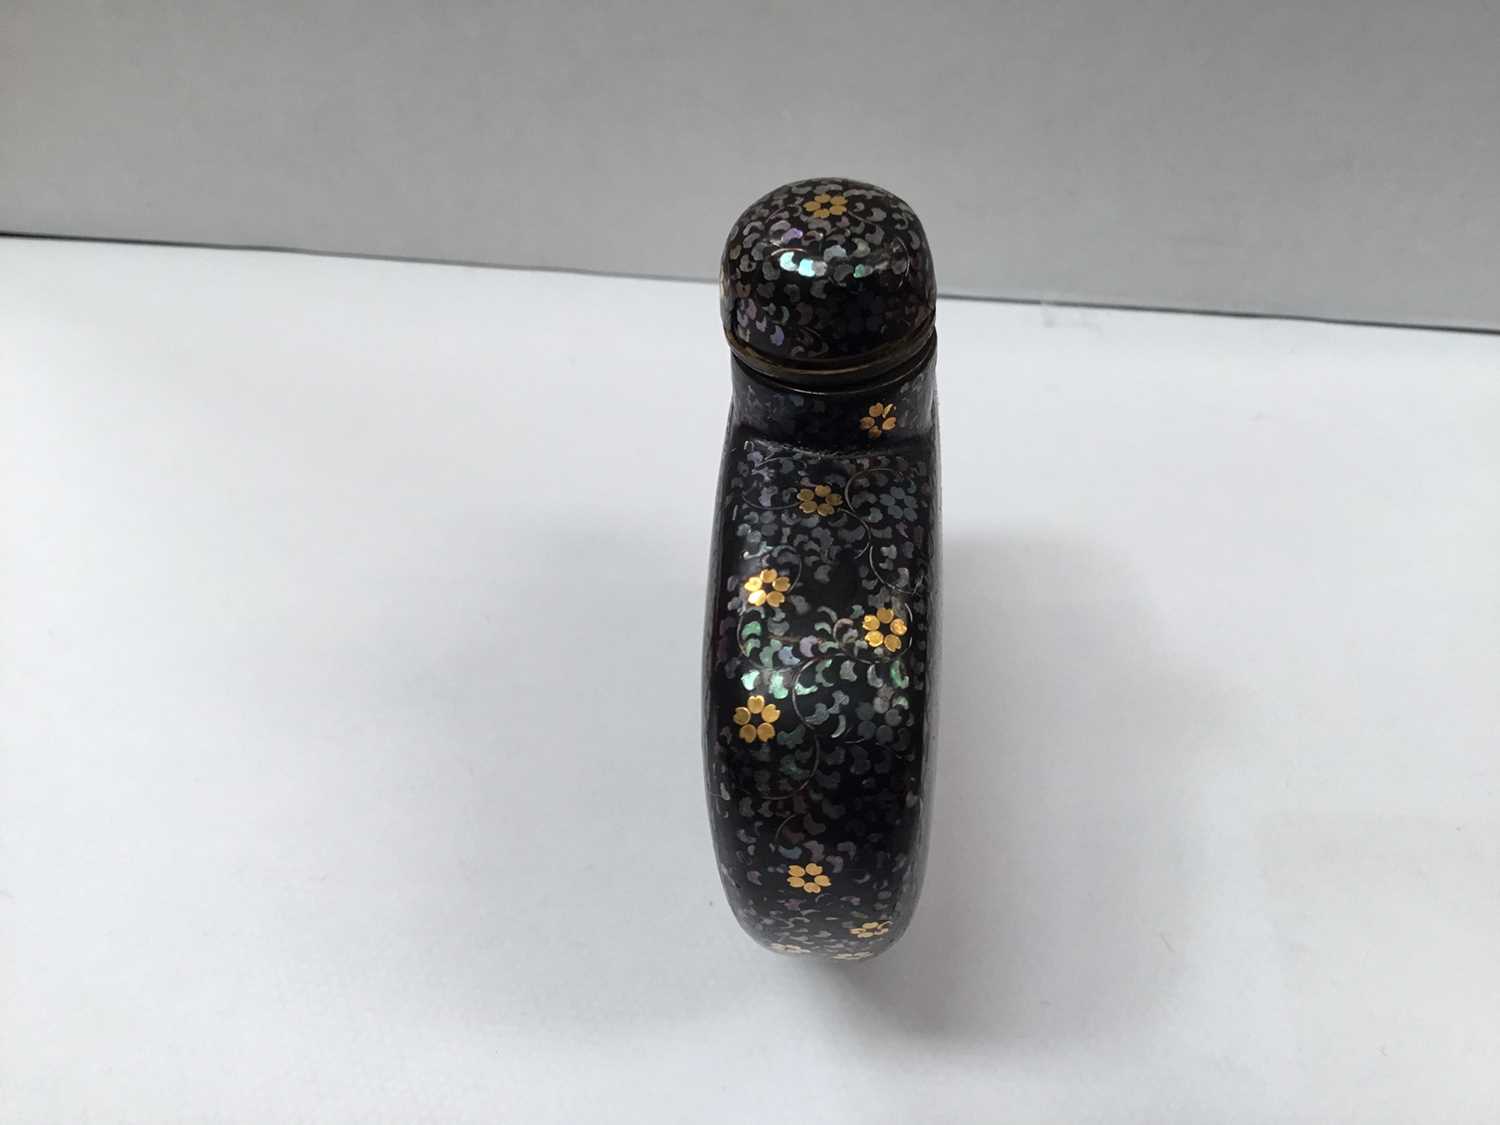 Japanese Meiji period lac burgaute metal inlaid heart shaped snuff bottle and stopper - Image 6 of 7